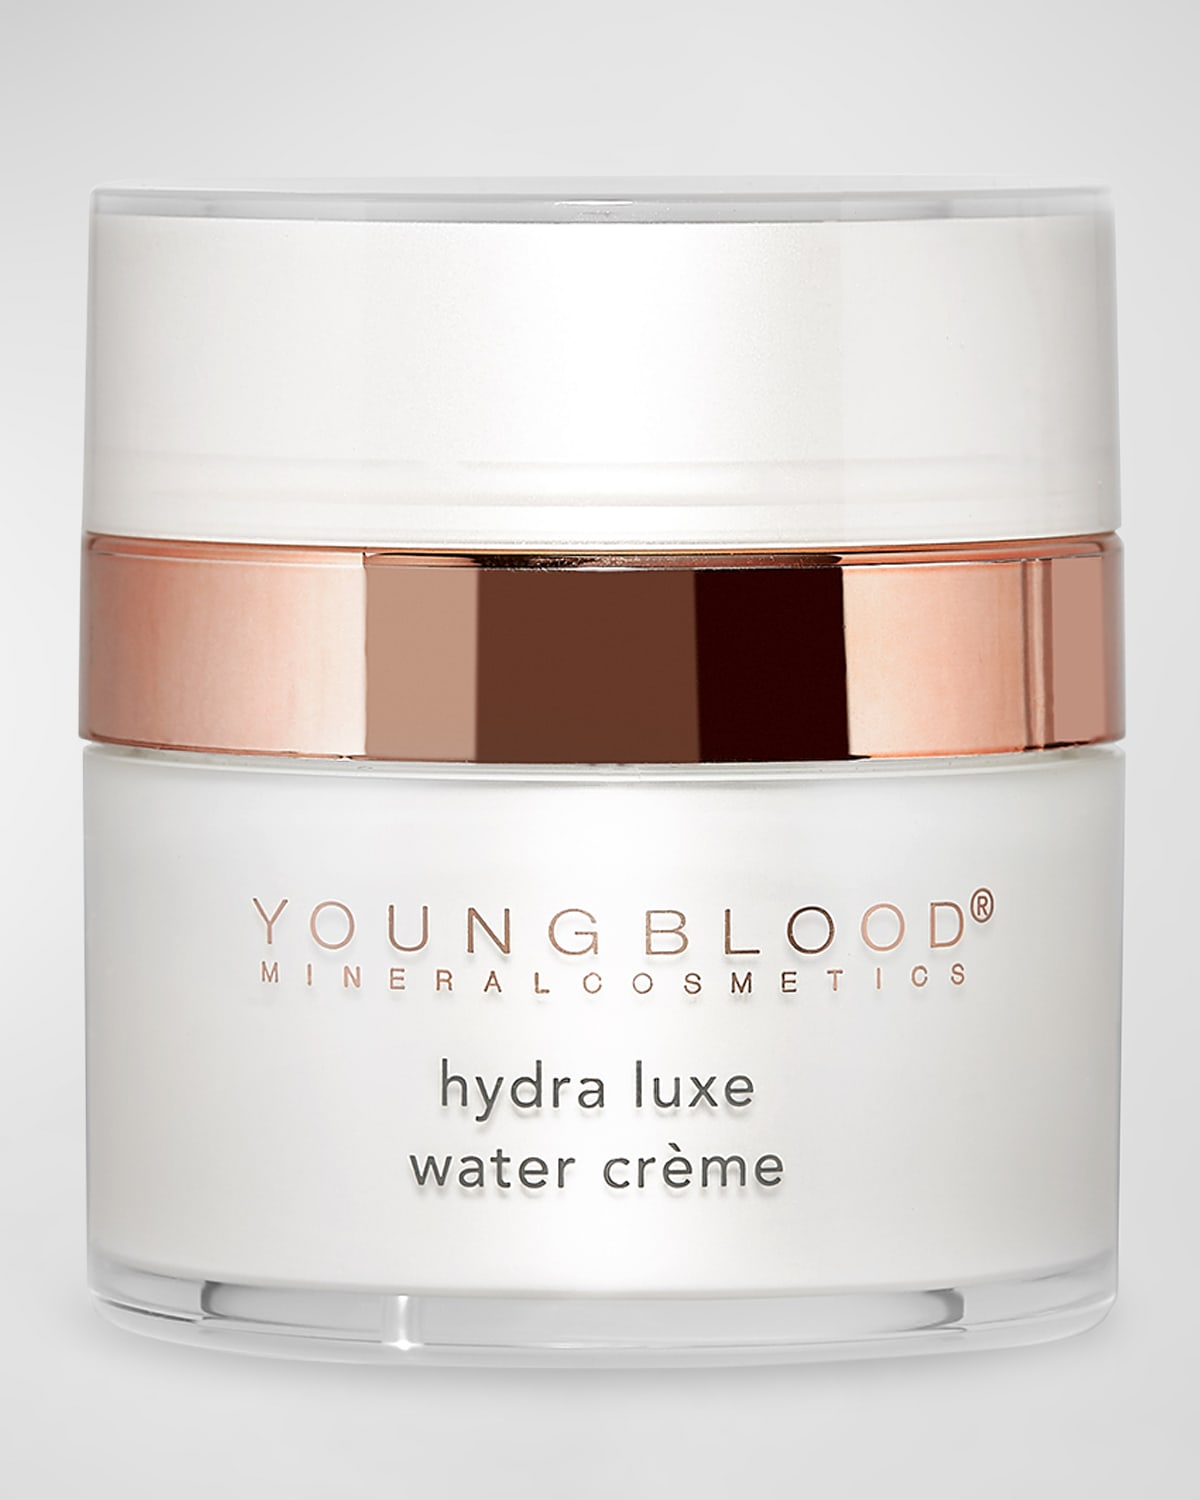 Hydra Luxe Water Creme, 1.7 oz.